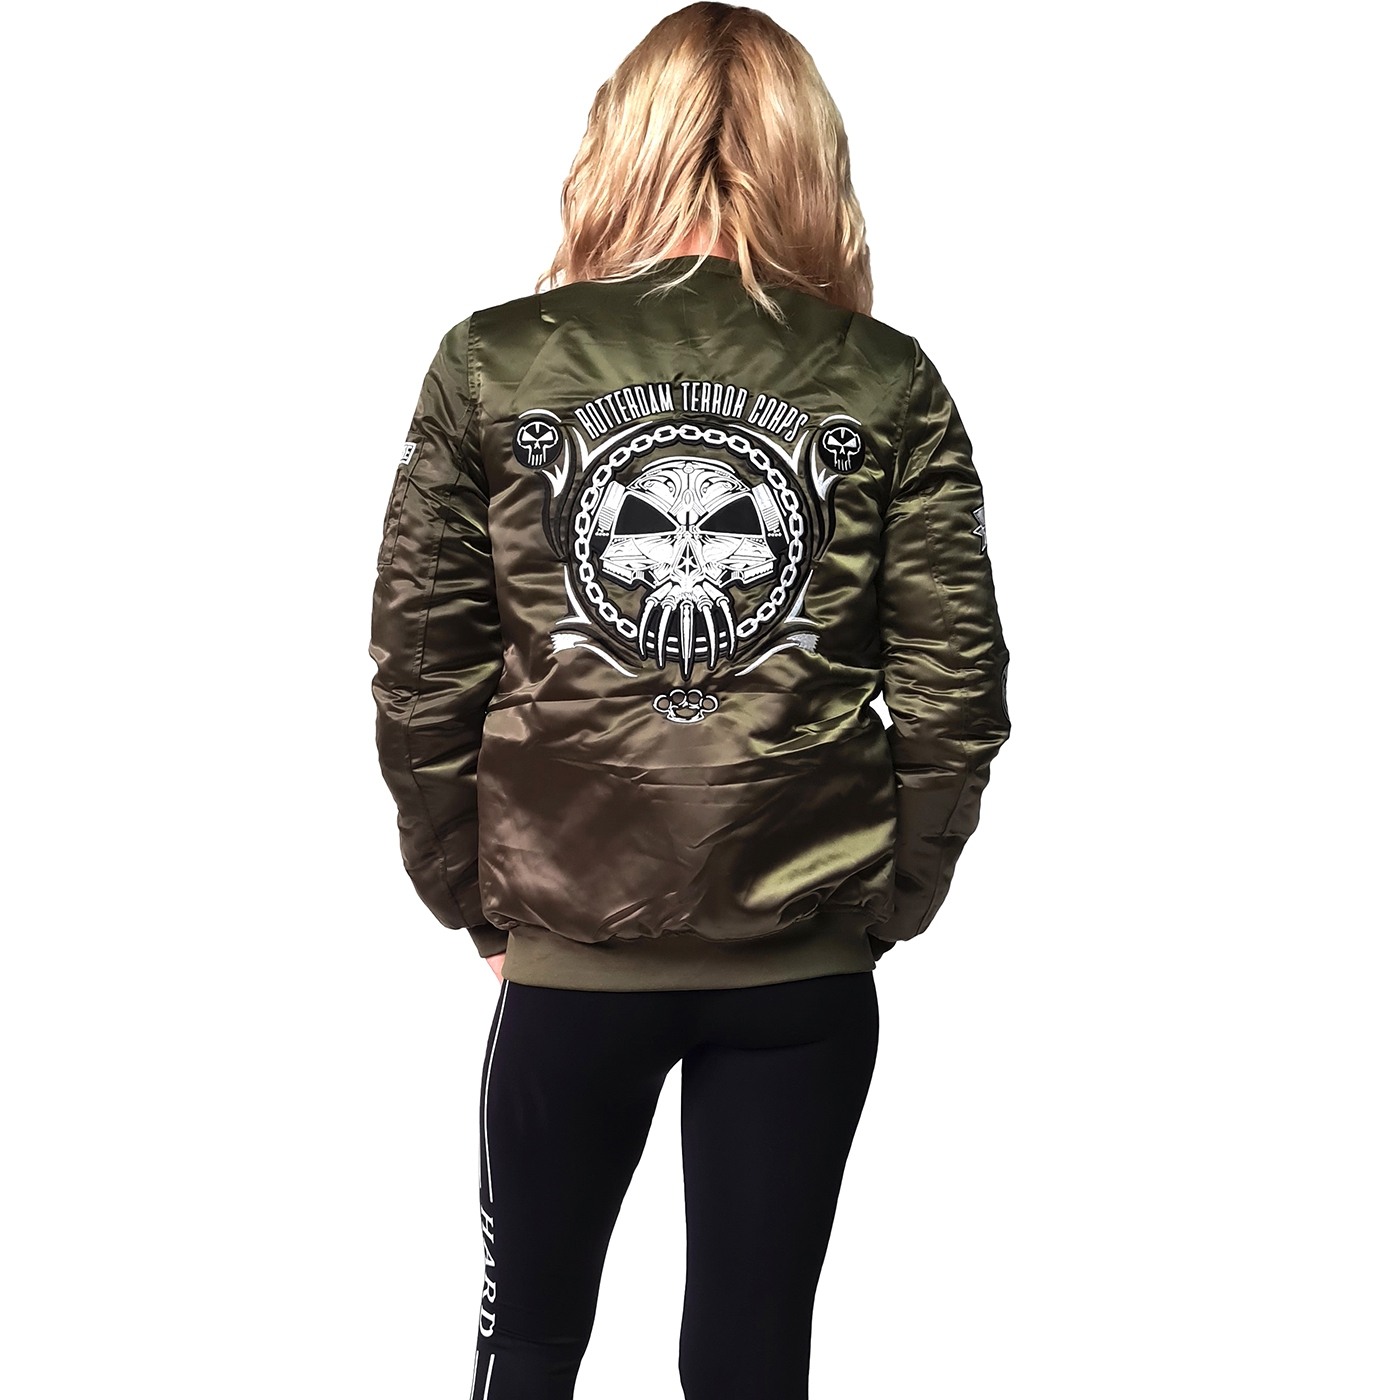 rand Bisschop Charmant RTC Lady Bomber Jacket Army Green (RTCBOMLAG) Bomber - Rigeshop